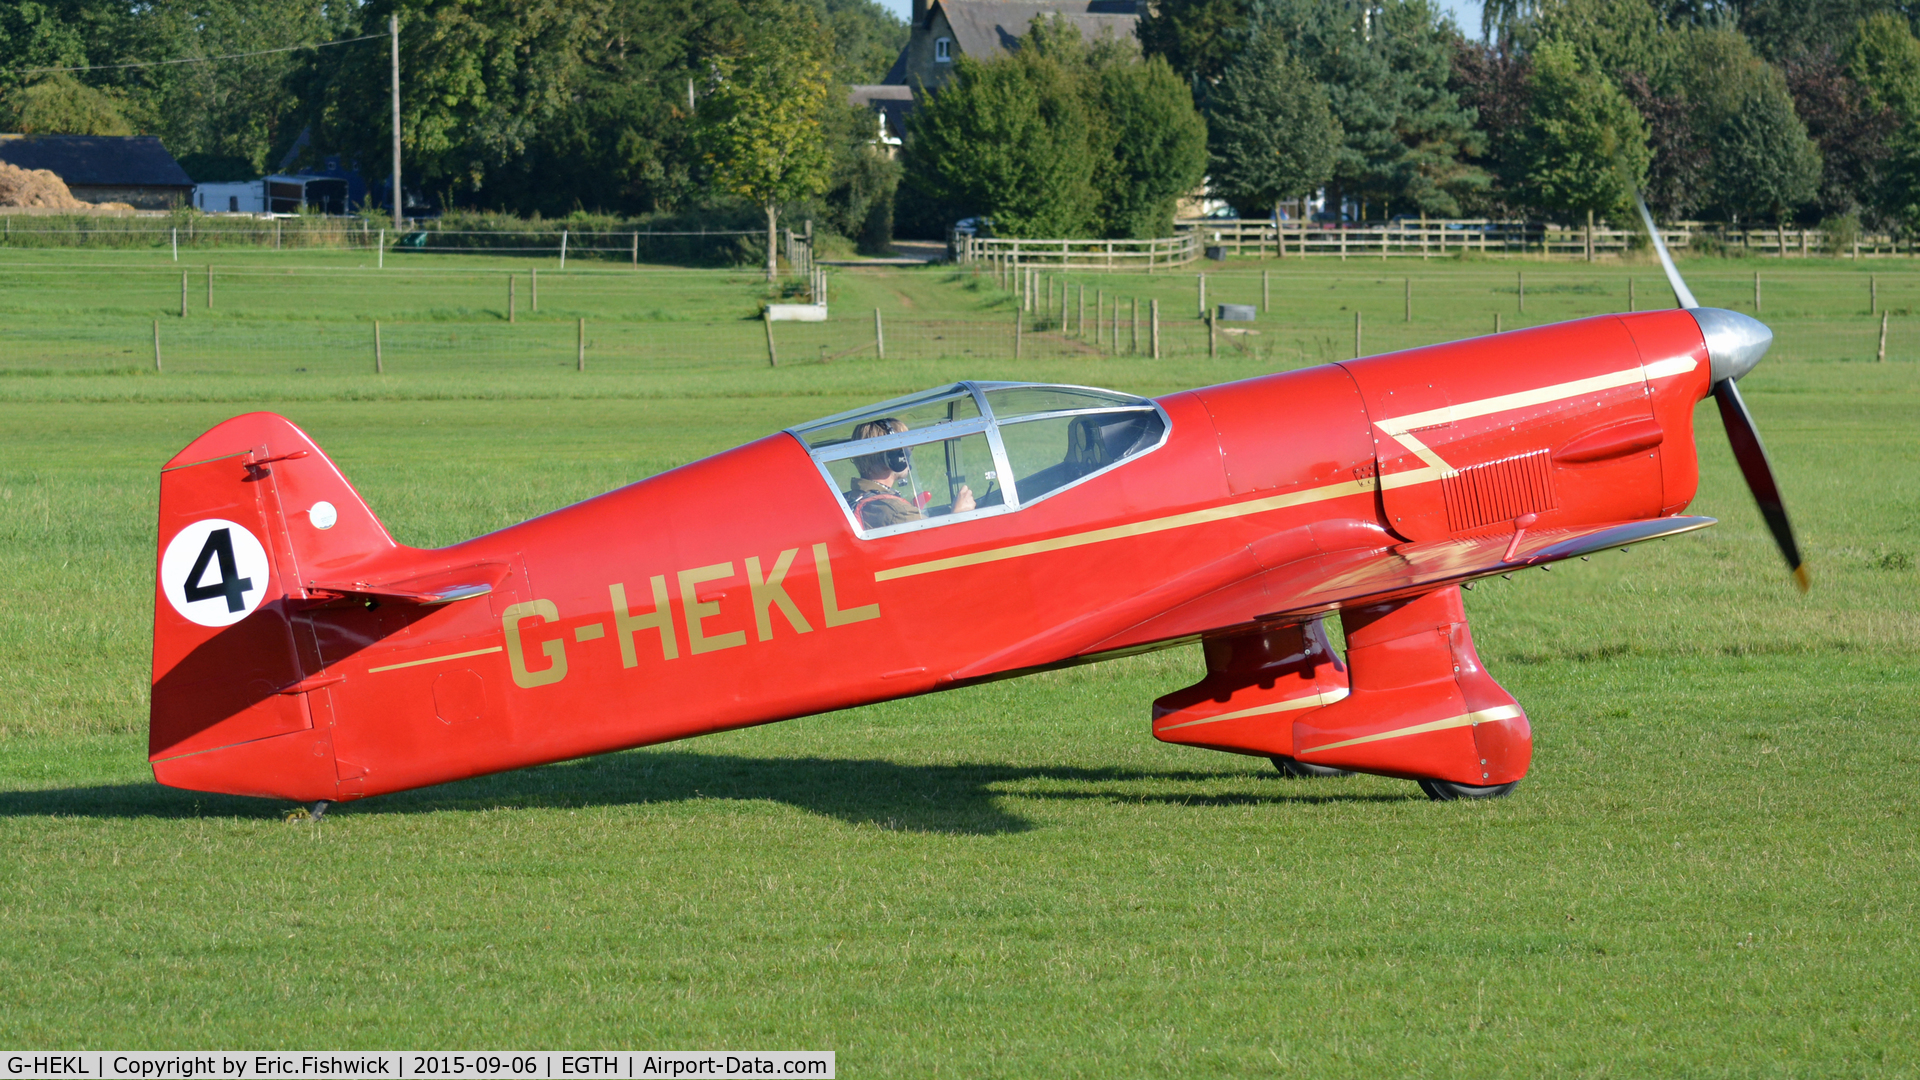 G-HEKL, 2008 Percival Mew Gull replica C/N PFA 013-14759, 2. G-HEKL at The Shuttleworth Pagent Airshow, Sep. 2015.